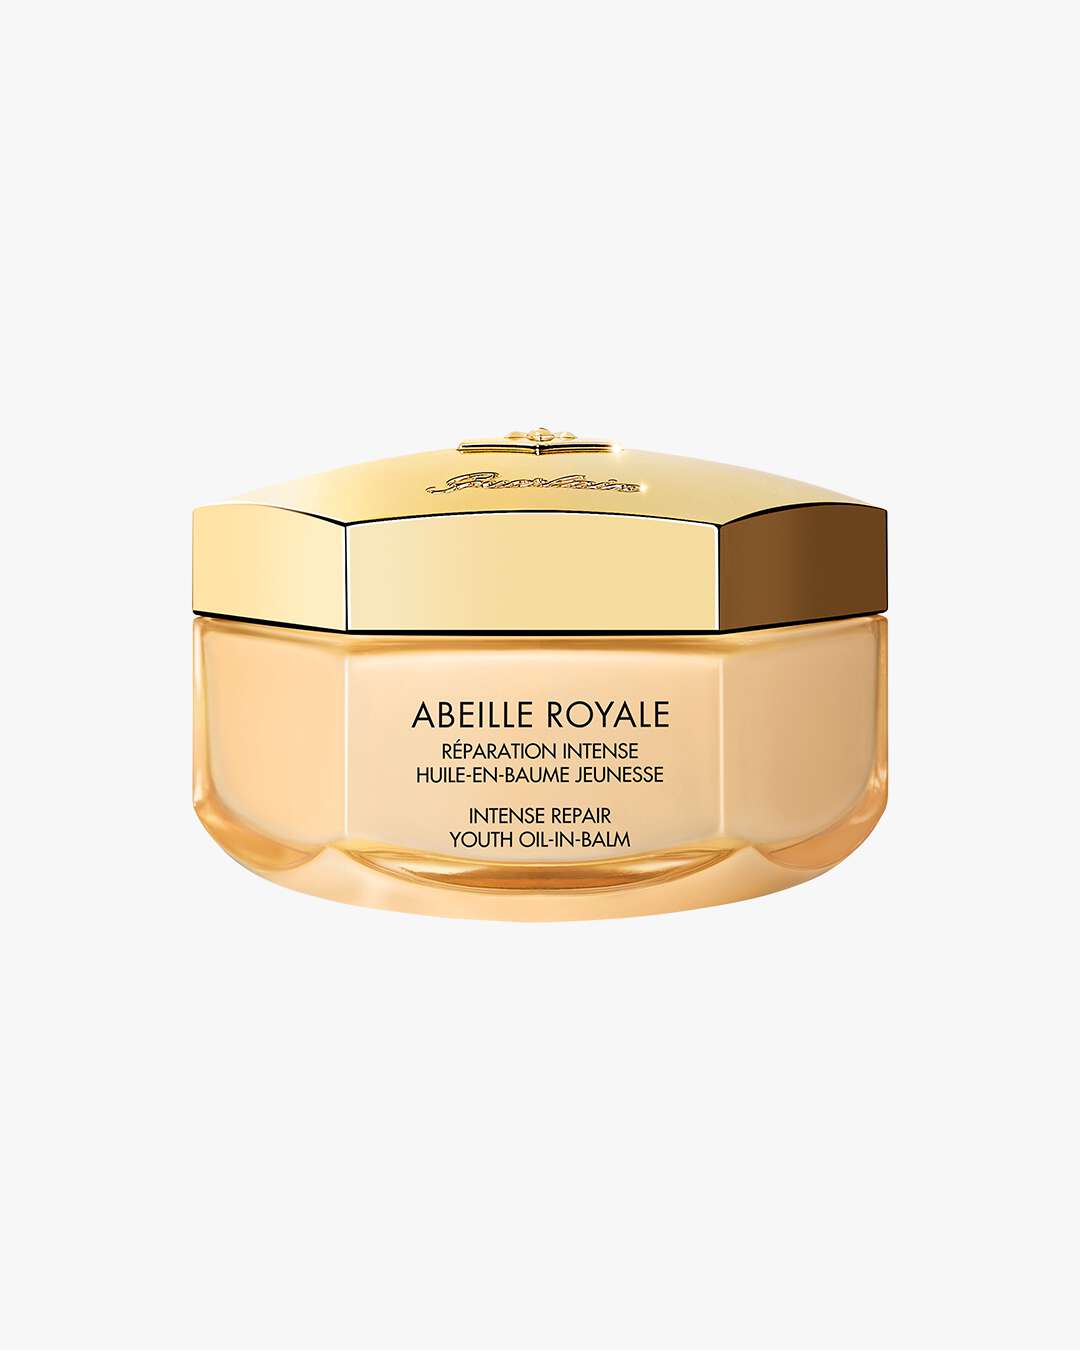 Abeille Royale Intense Repair Youth Oil-in-Balm 80 ml